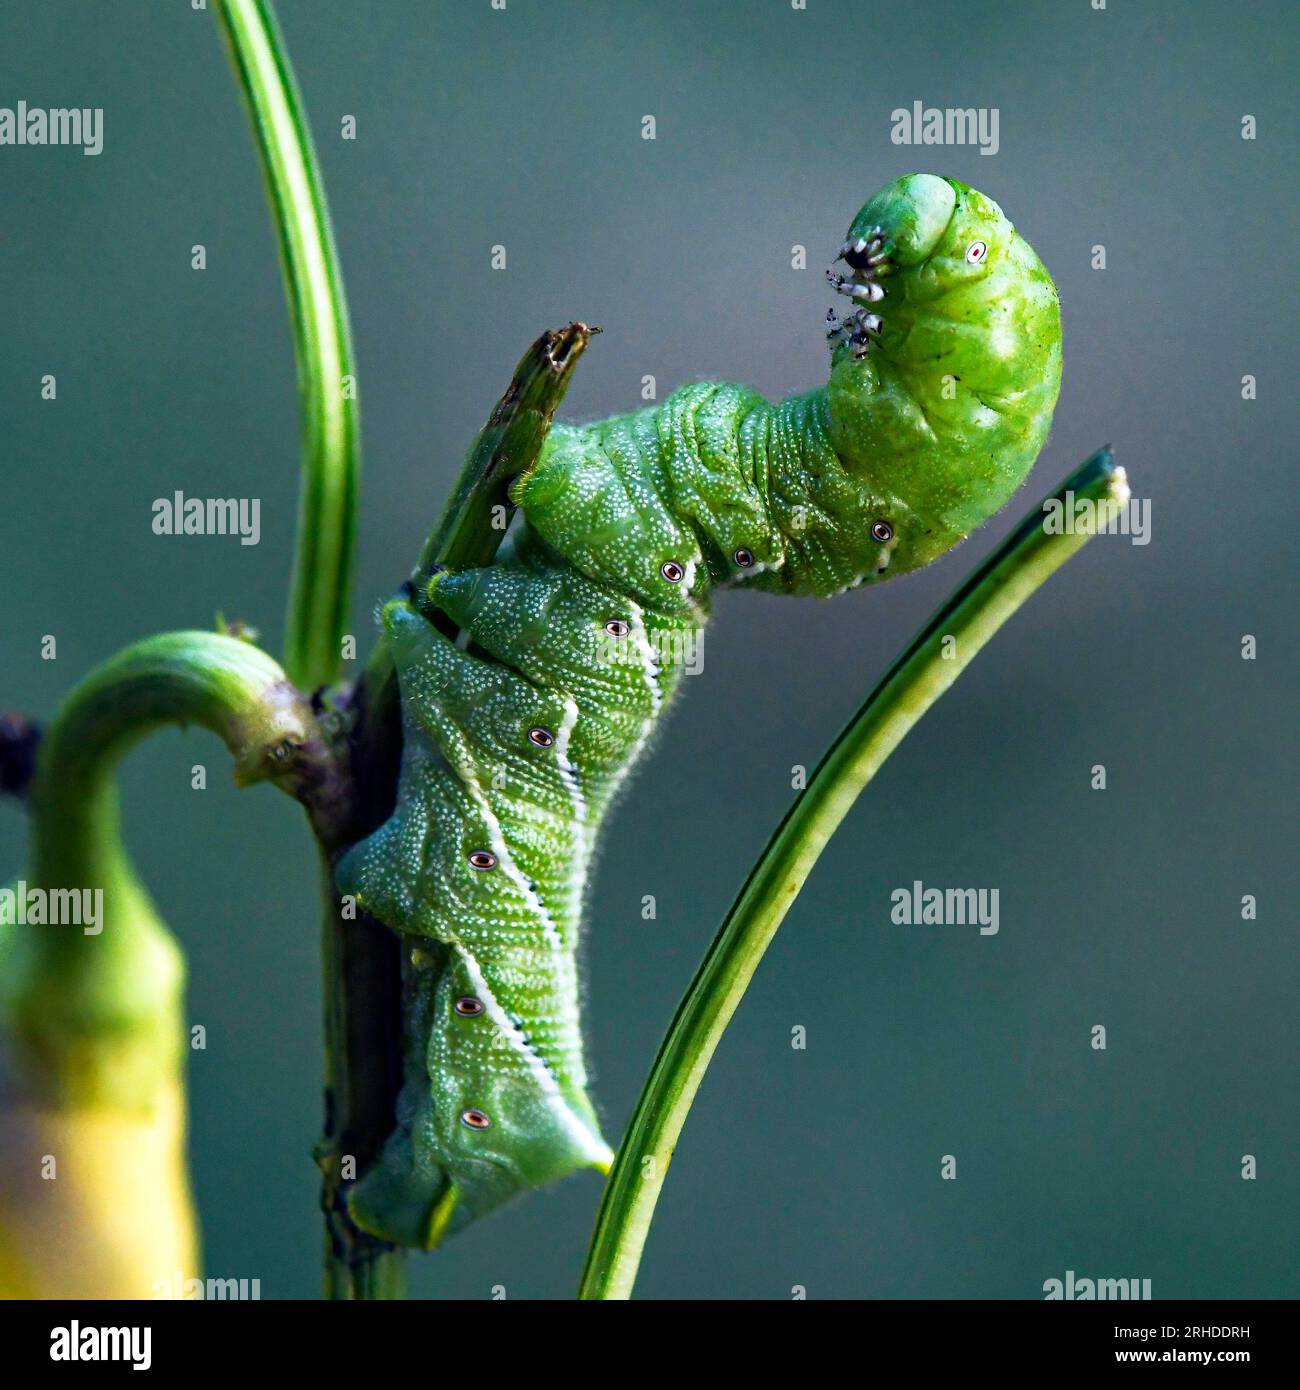 Macro photography of the tomato hornworm (Manduca quinquemaculata) with bokeh background. Stock Photo